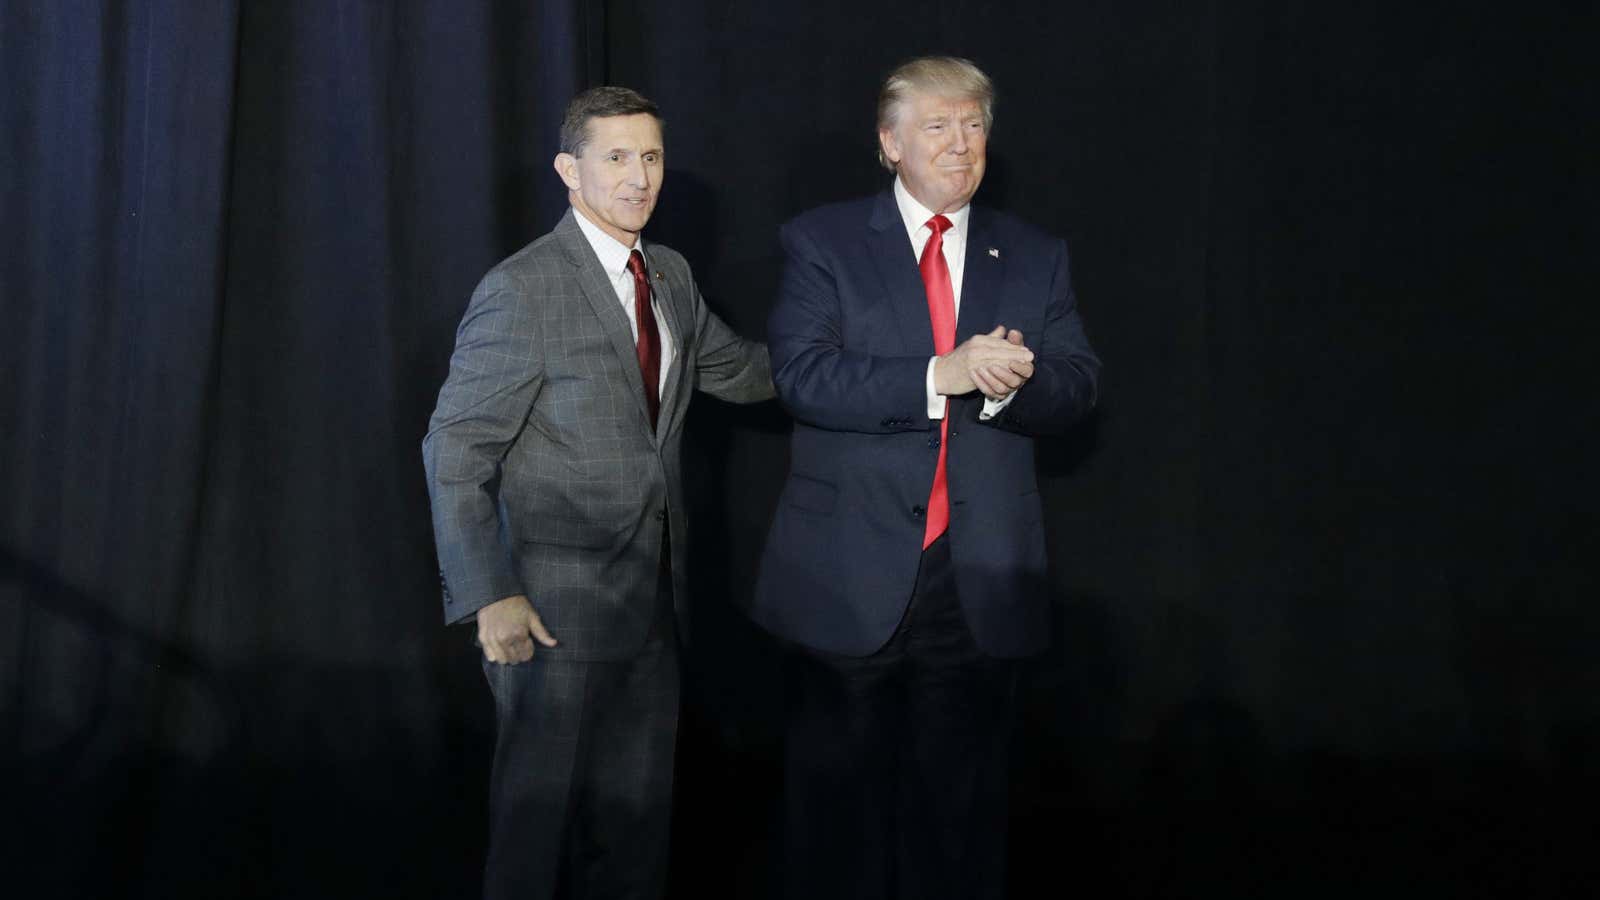 Trump and Flynn in happier times.